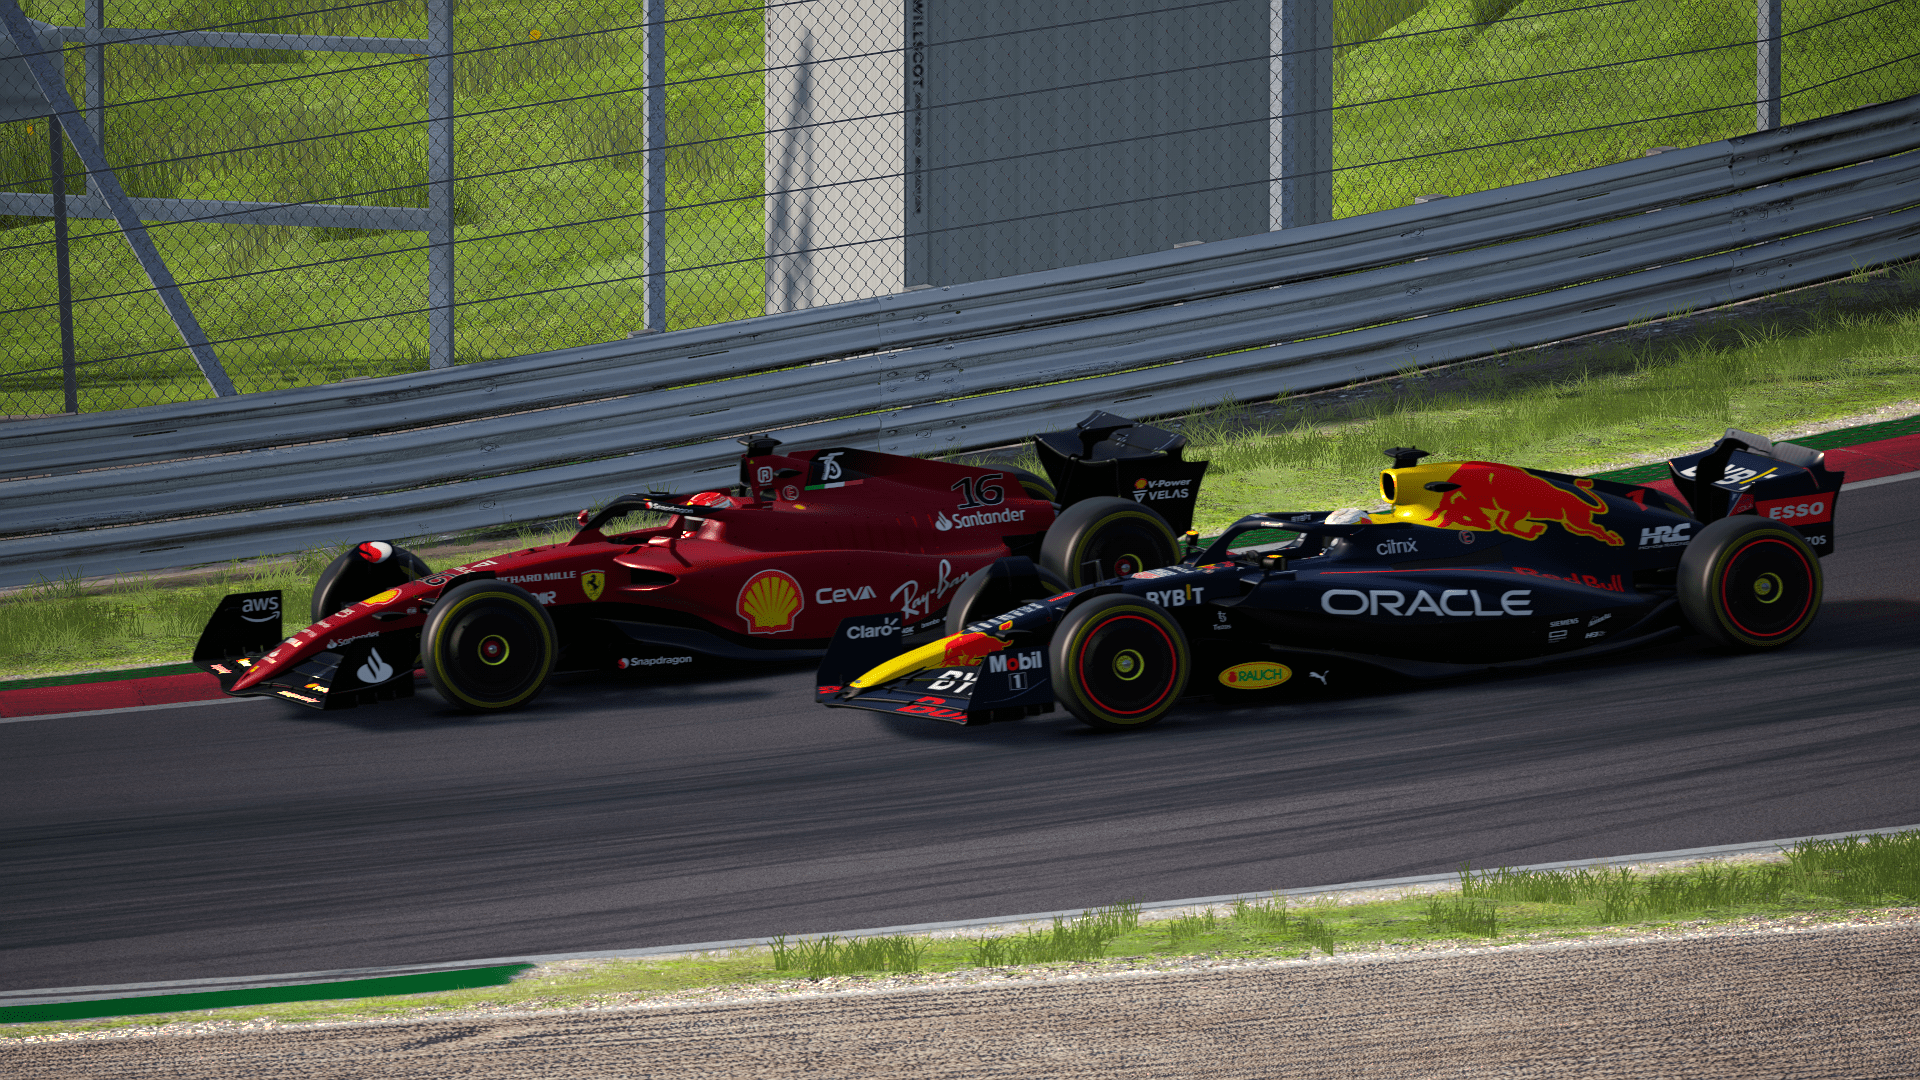 Screenshot_gp_2022_rb18_ks_red_bull_ring_EXQUISITE - PURE_20-0-123-0-33-50.png